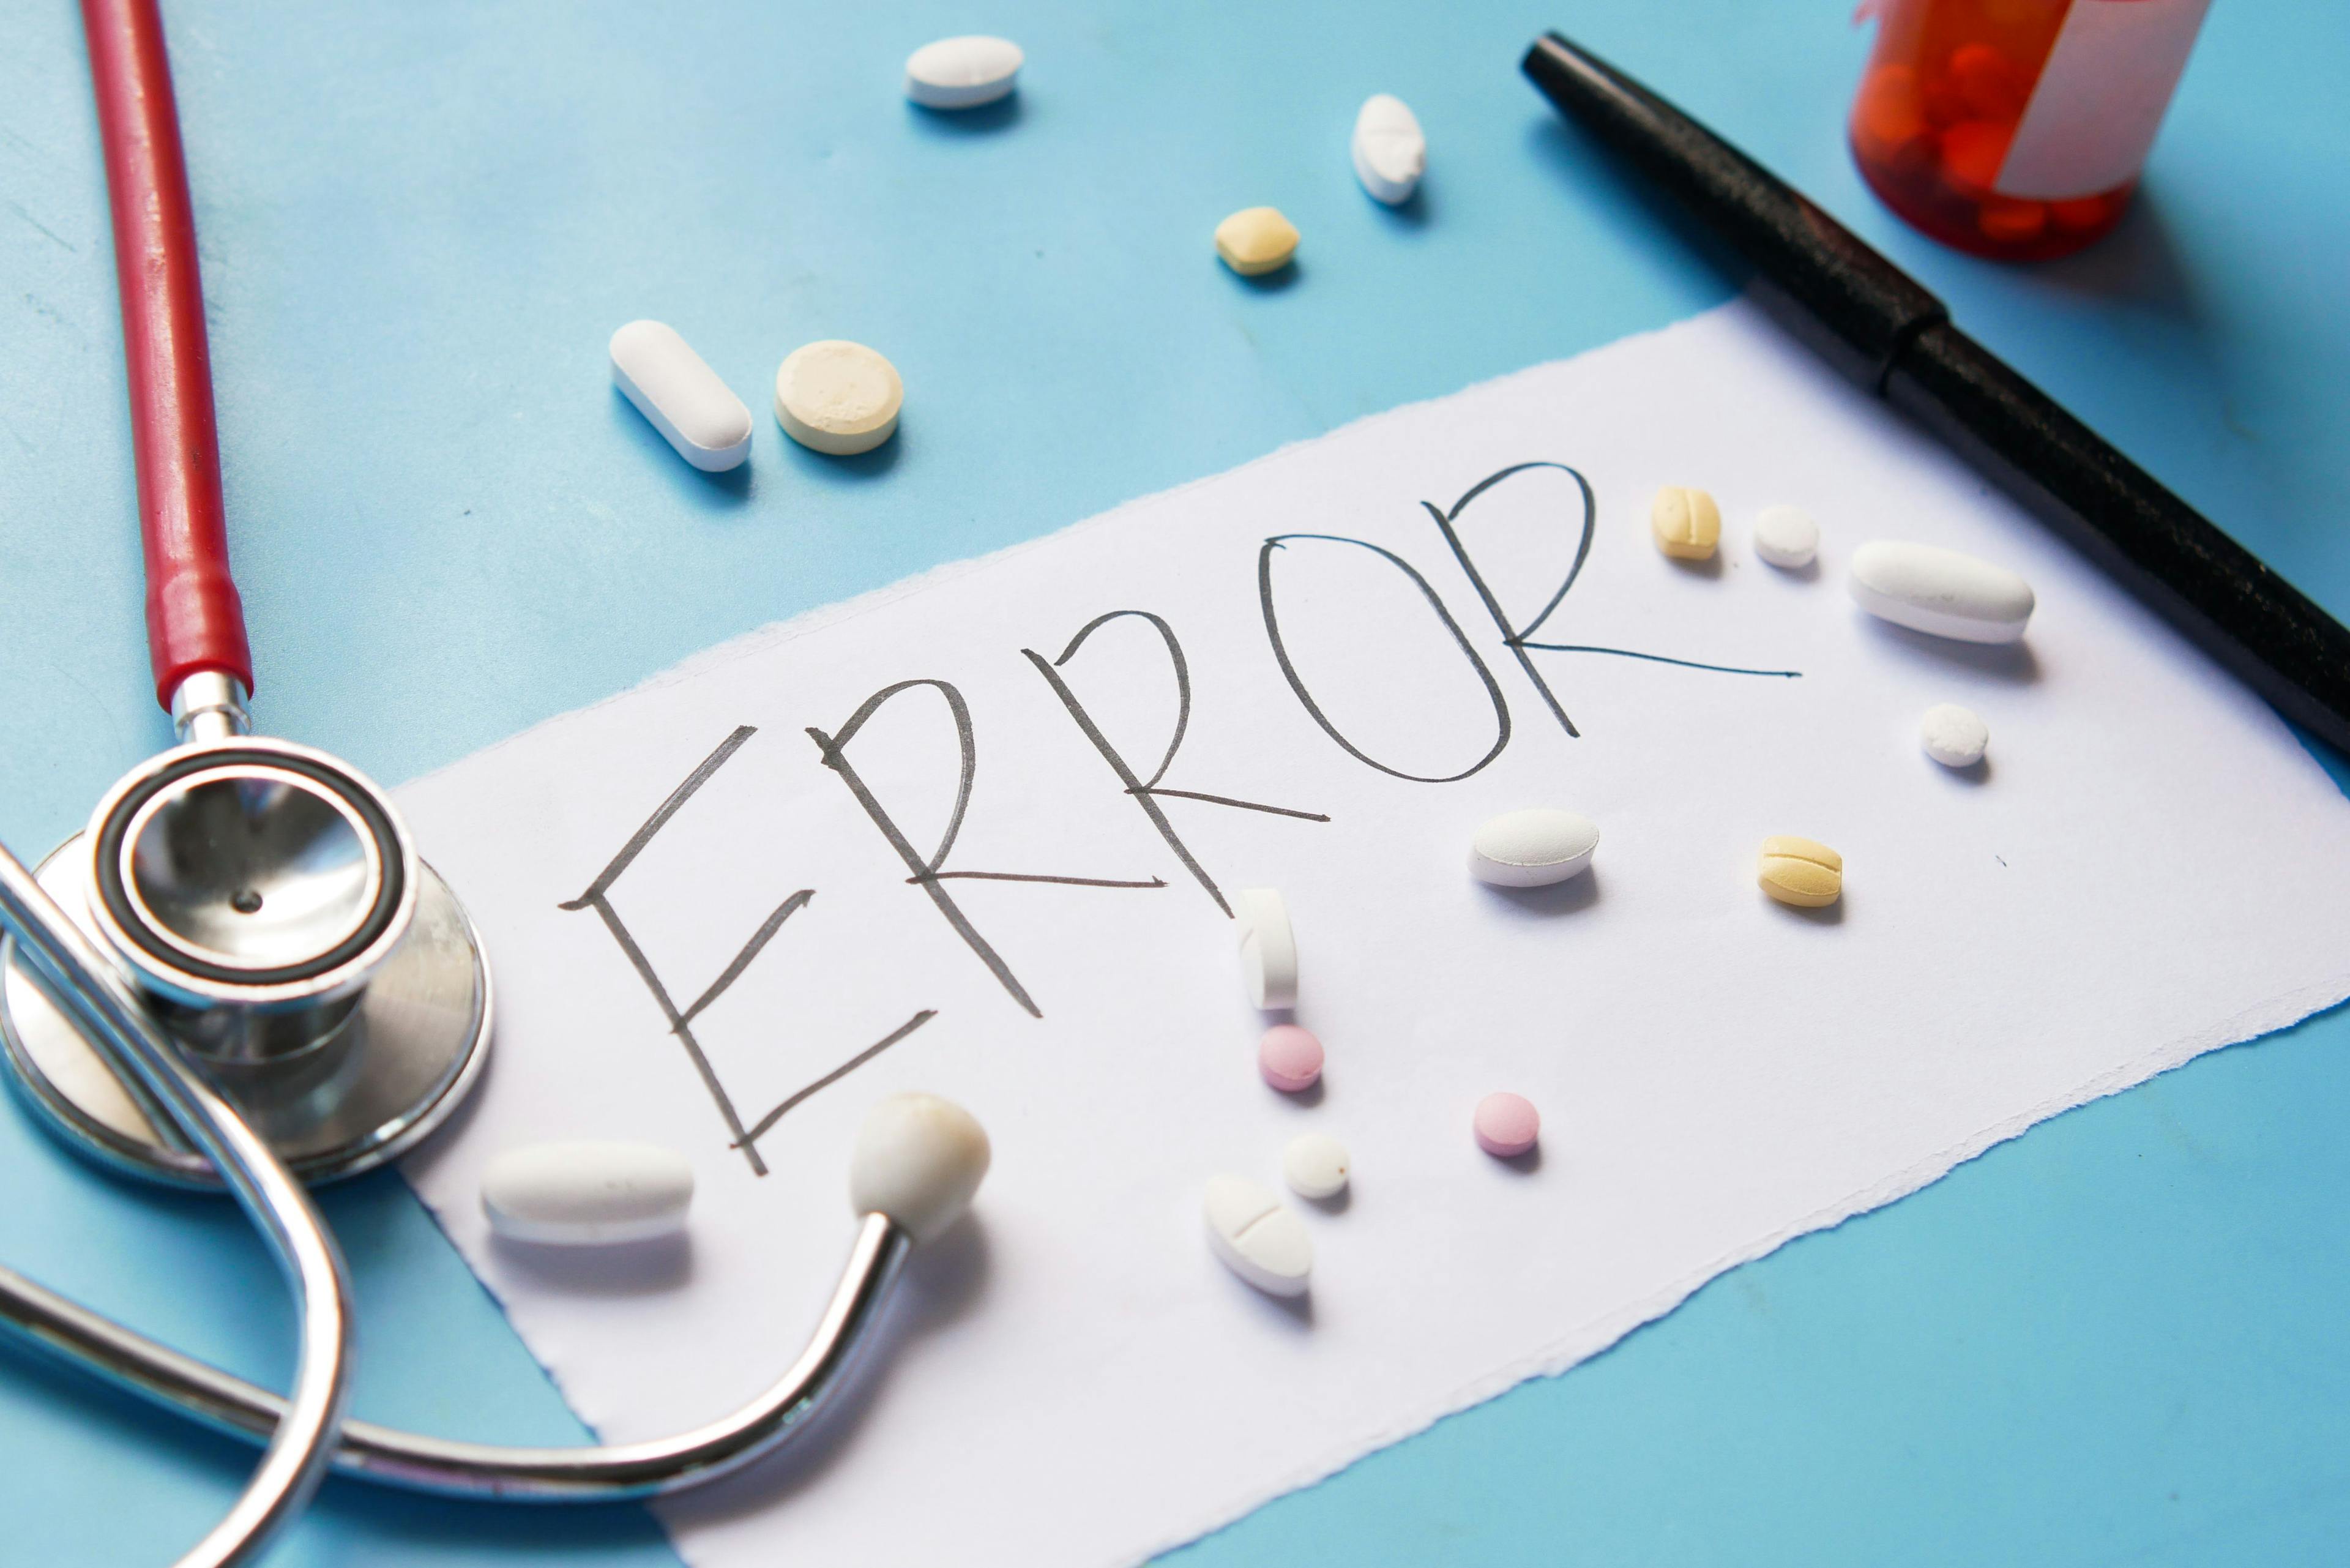 Medical error text on a paper with pills and stethoscope on table - Image credit: Towfiqu Barbhuiya | stock.adobe.com